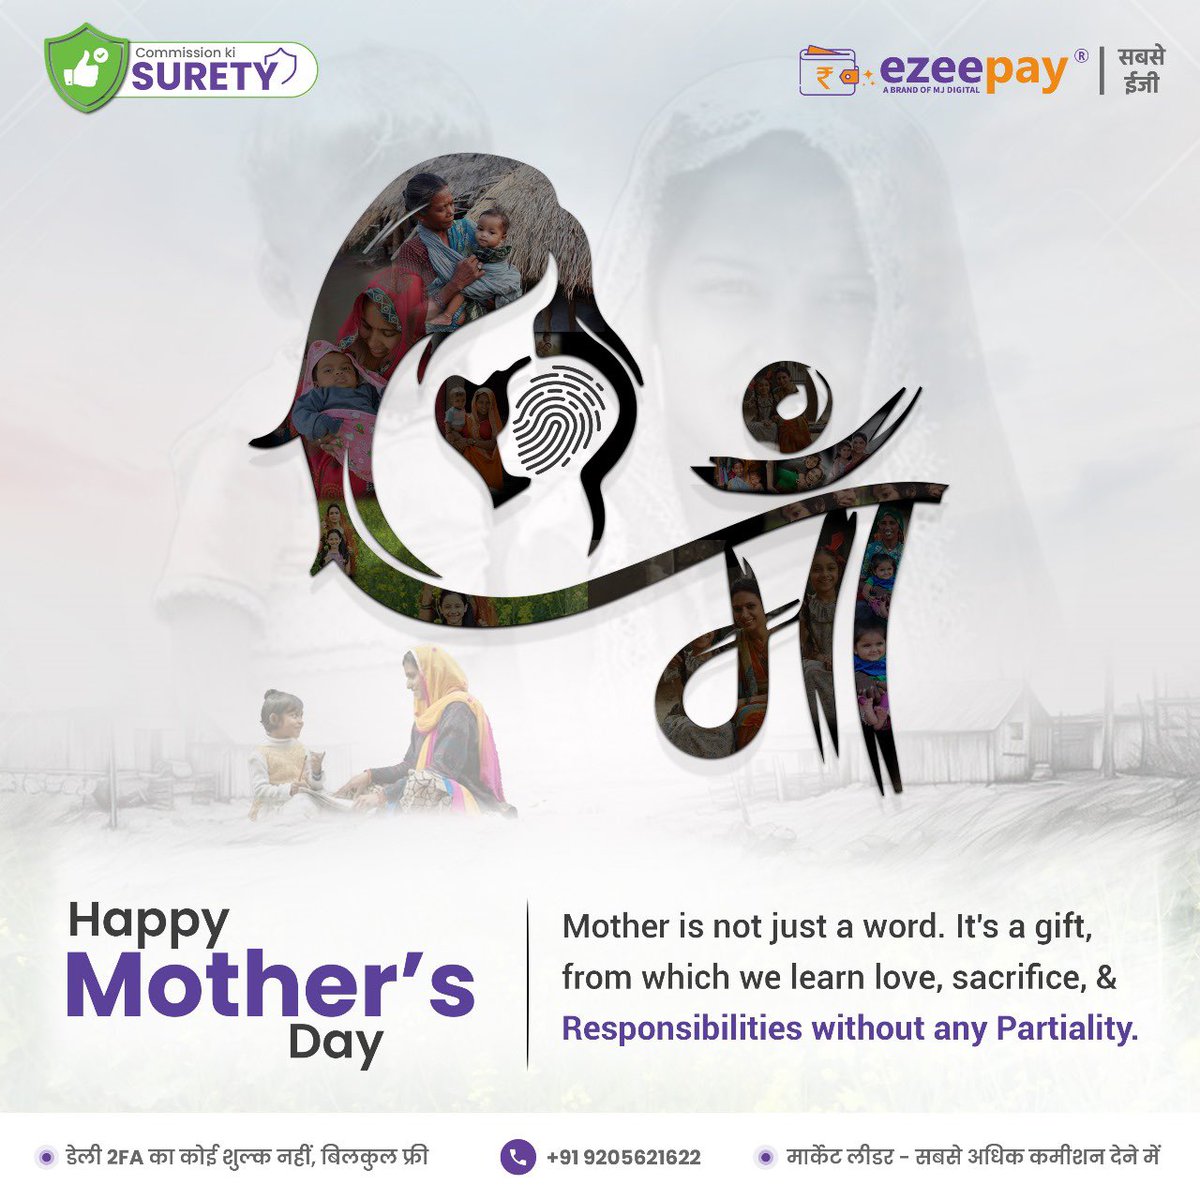 Mother is not just a word. It's a gift, from which we learn love, sacrifice, and responsibilities without any partiality. Happy mother's Day 

#mothersday #mothersdaygift #love #happymothersday #mom #mother #family #motherhood #fathersday #momlife #mothers #mothersdaygifts